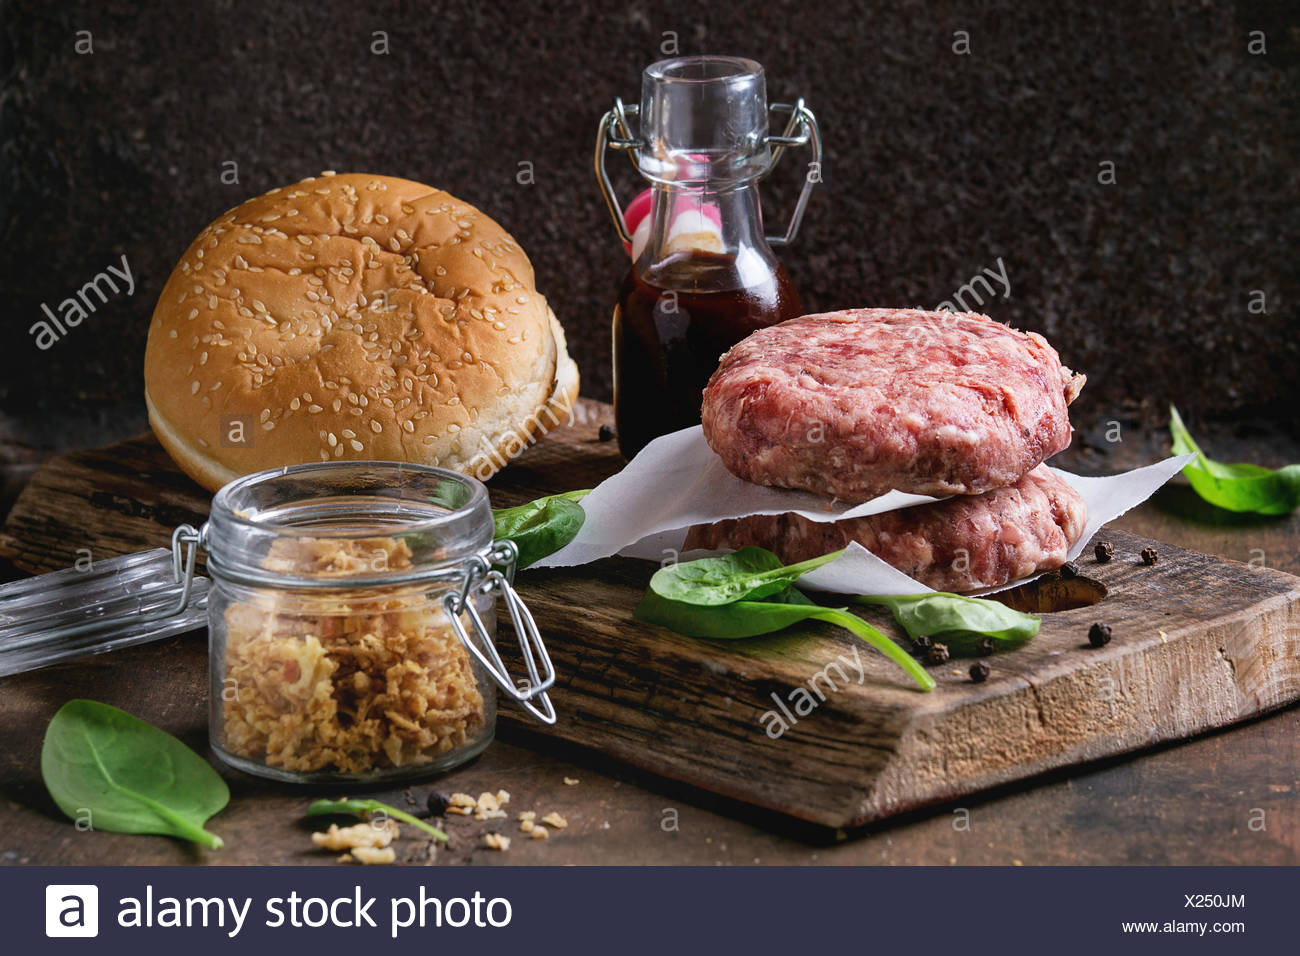 Ingredients For Making Hamburger Raw Burger Beef Cutlet Two Buns Fried Onion Fresh Spinach And Ketchup Sauce On Dark Wood Chopping Board Over Old Stock Photo Alamy